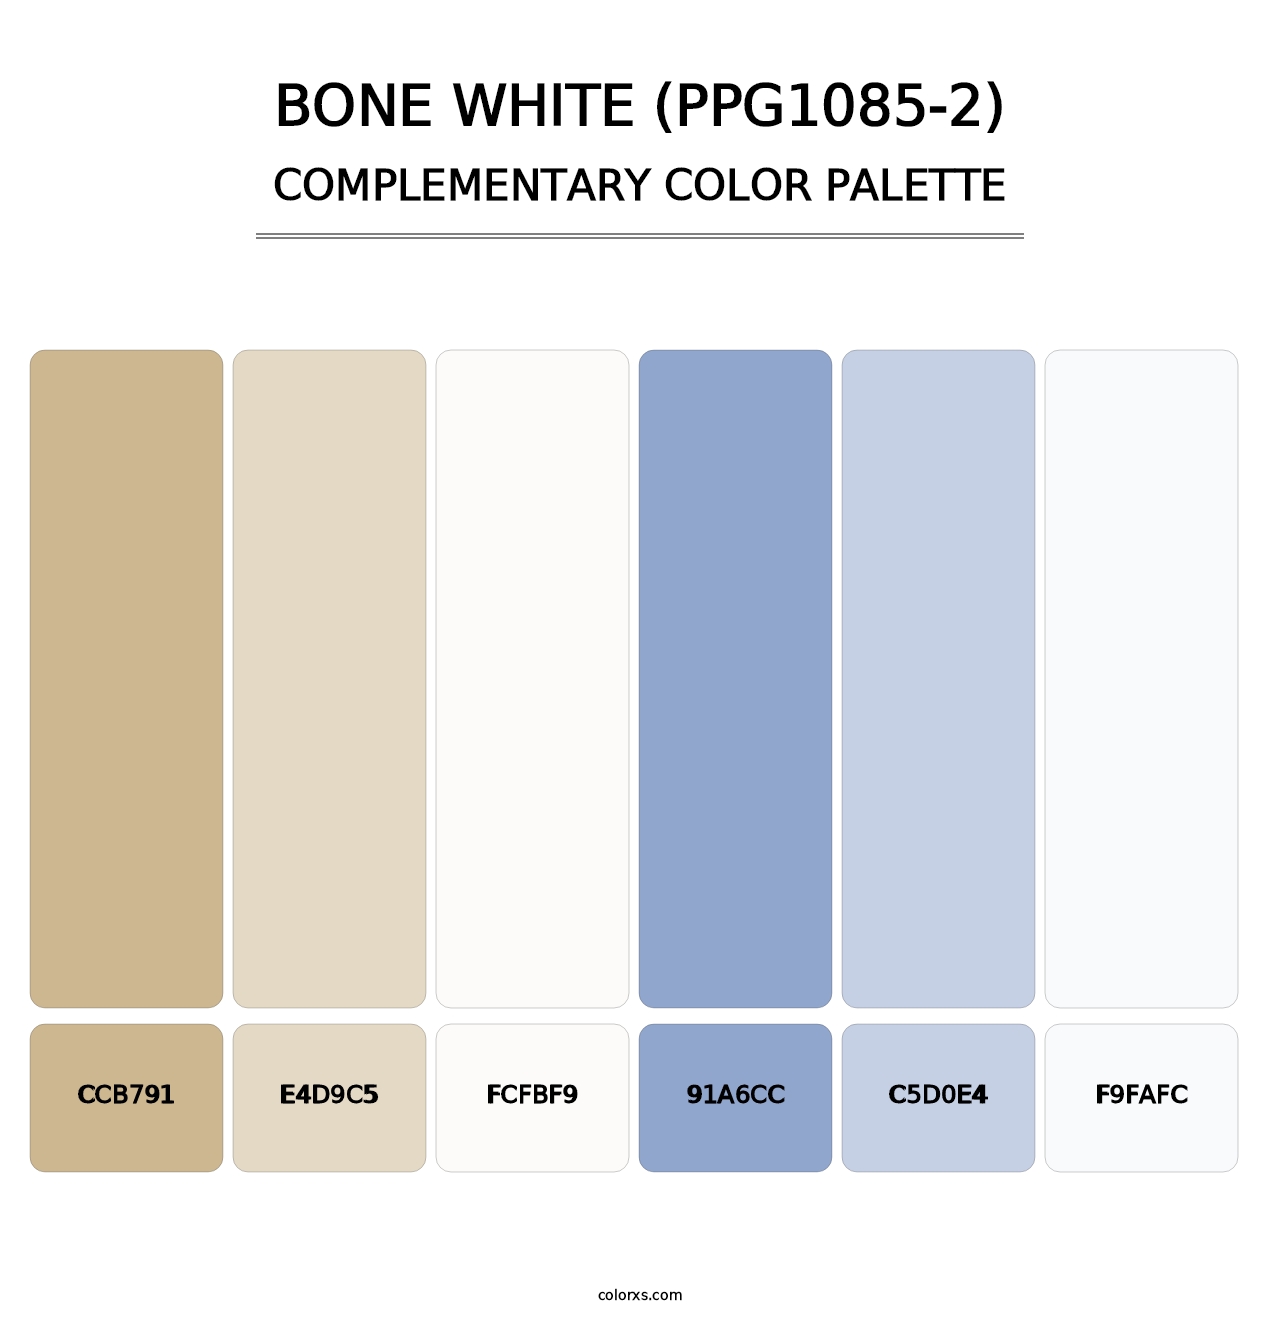 Bone White (PPG1085-2) - Complementary Color Palette